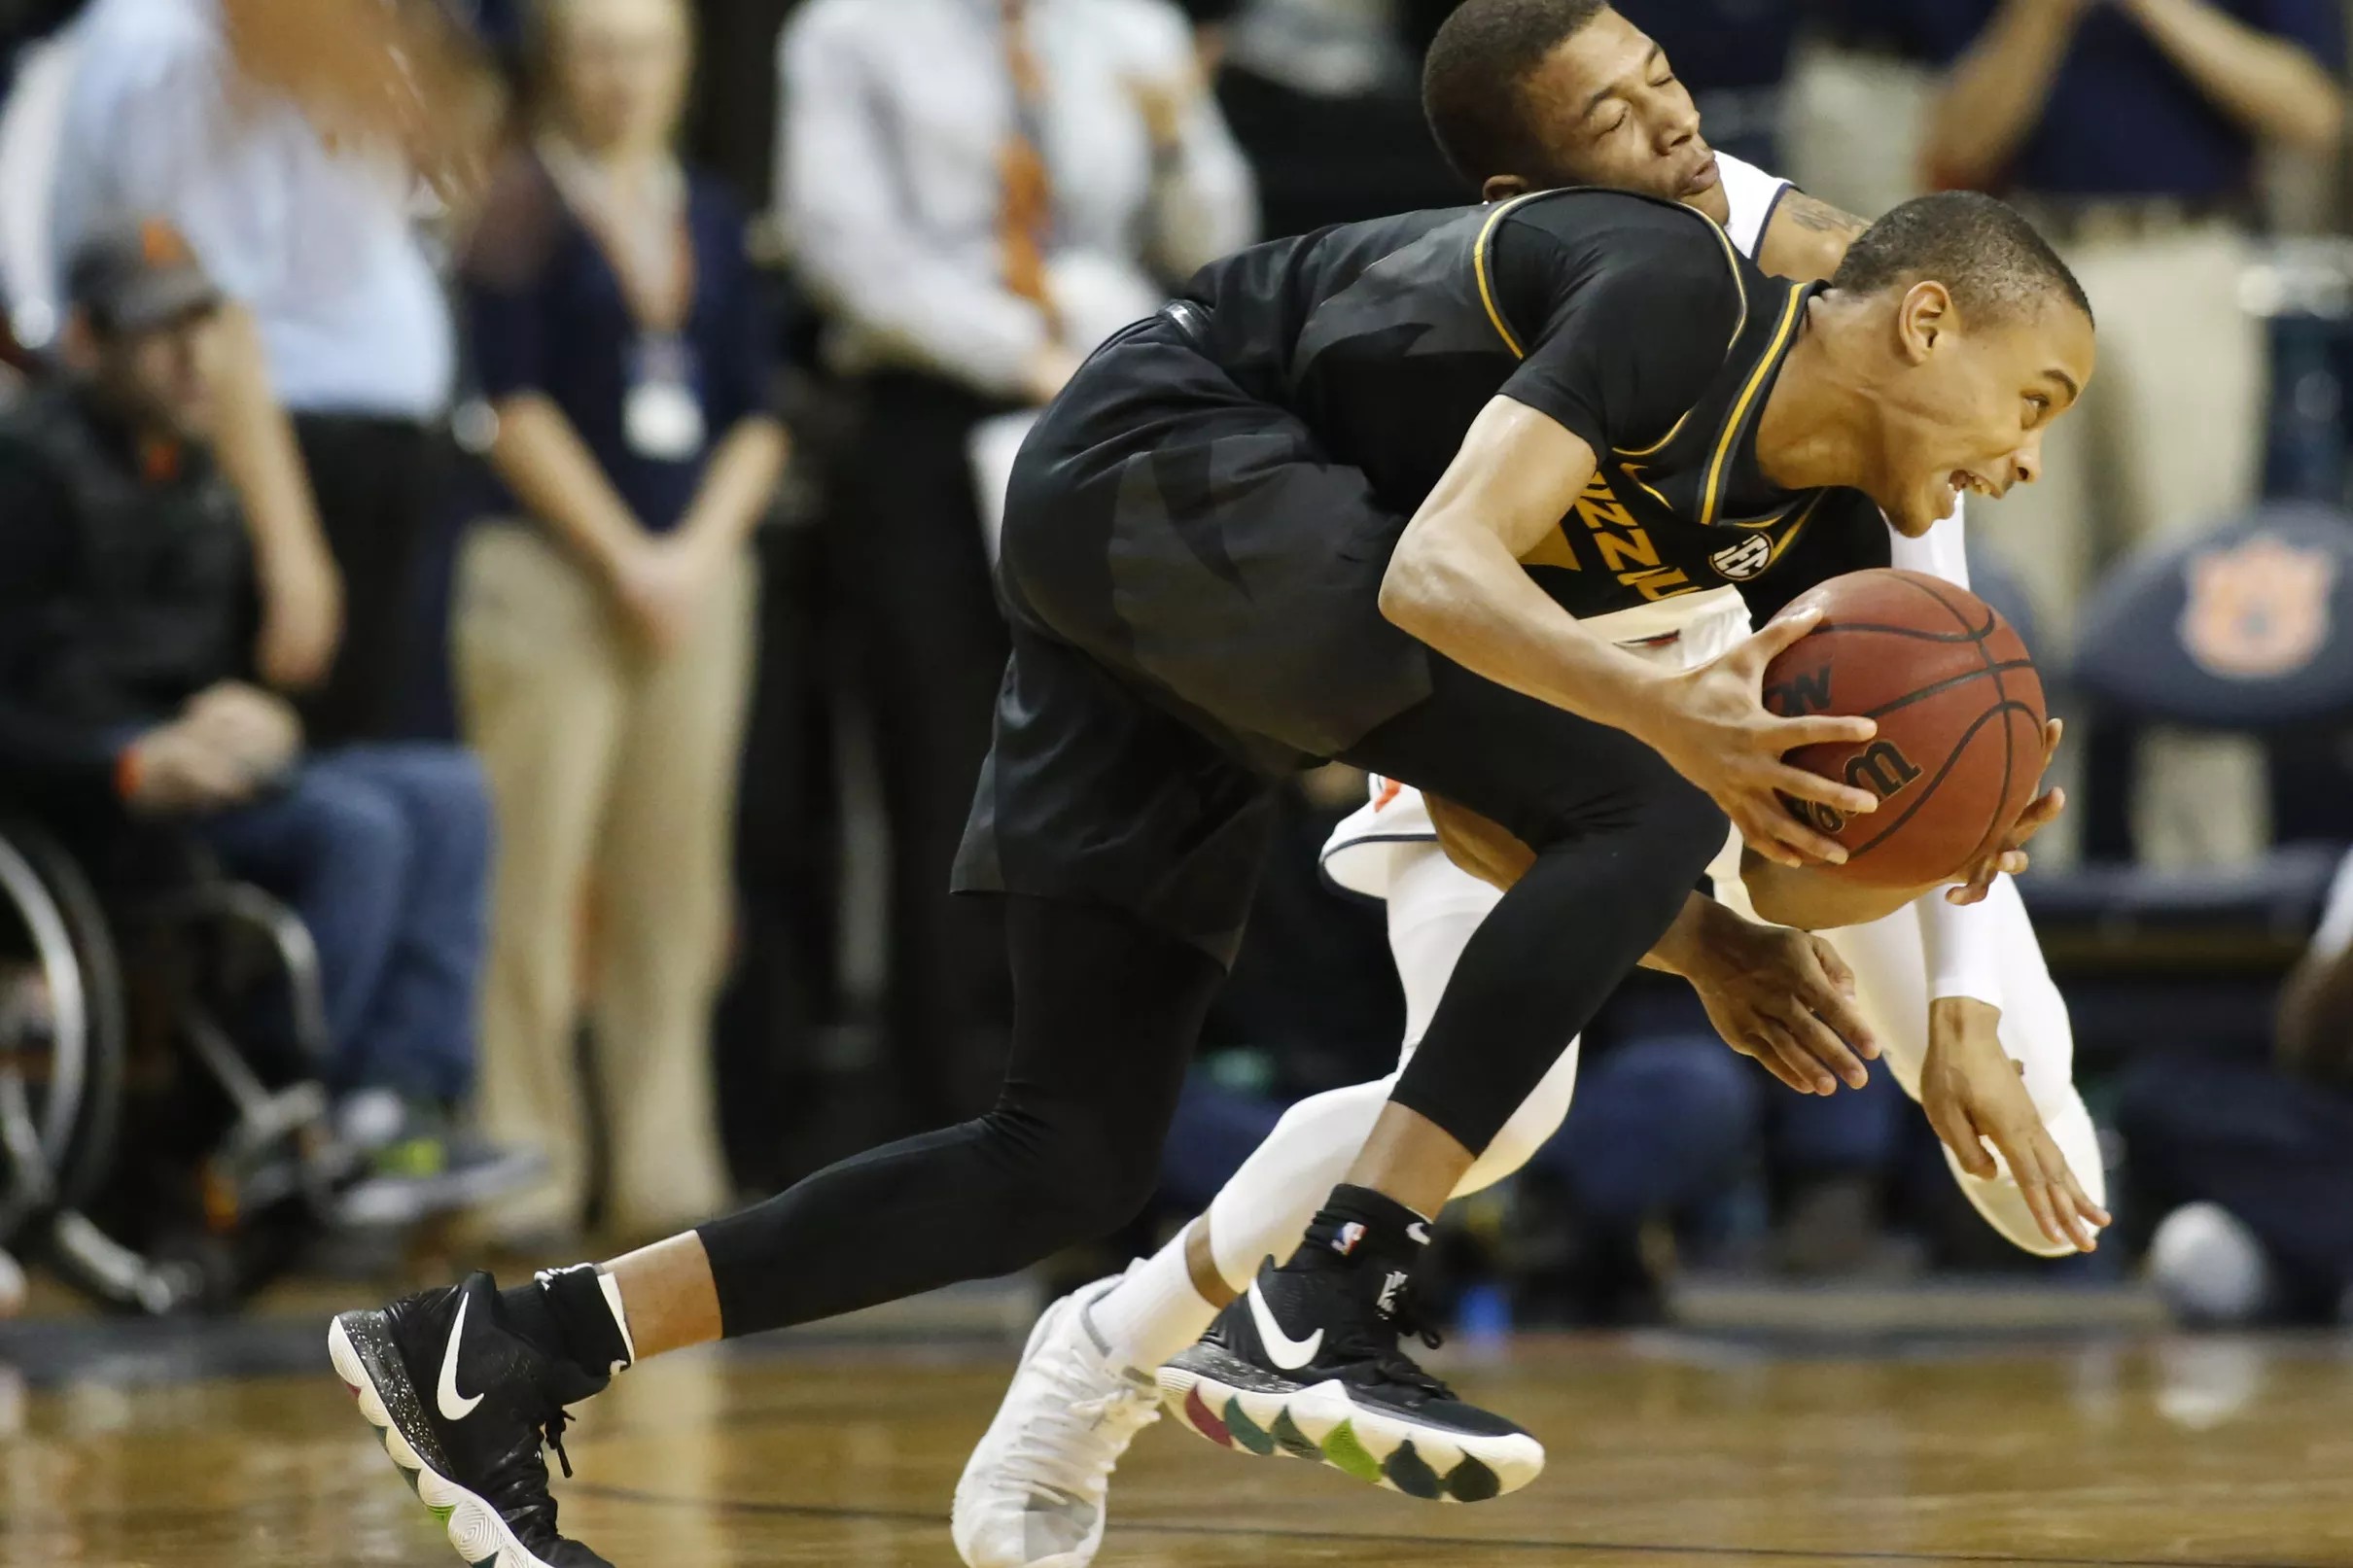 Freshman guard Xavier Pinson has flashed potential as his role grows